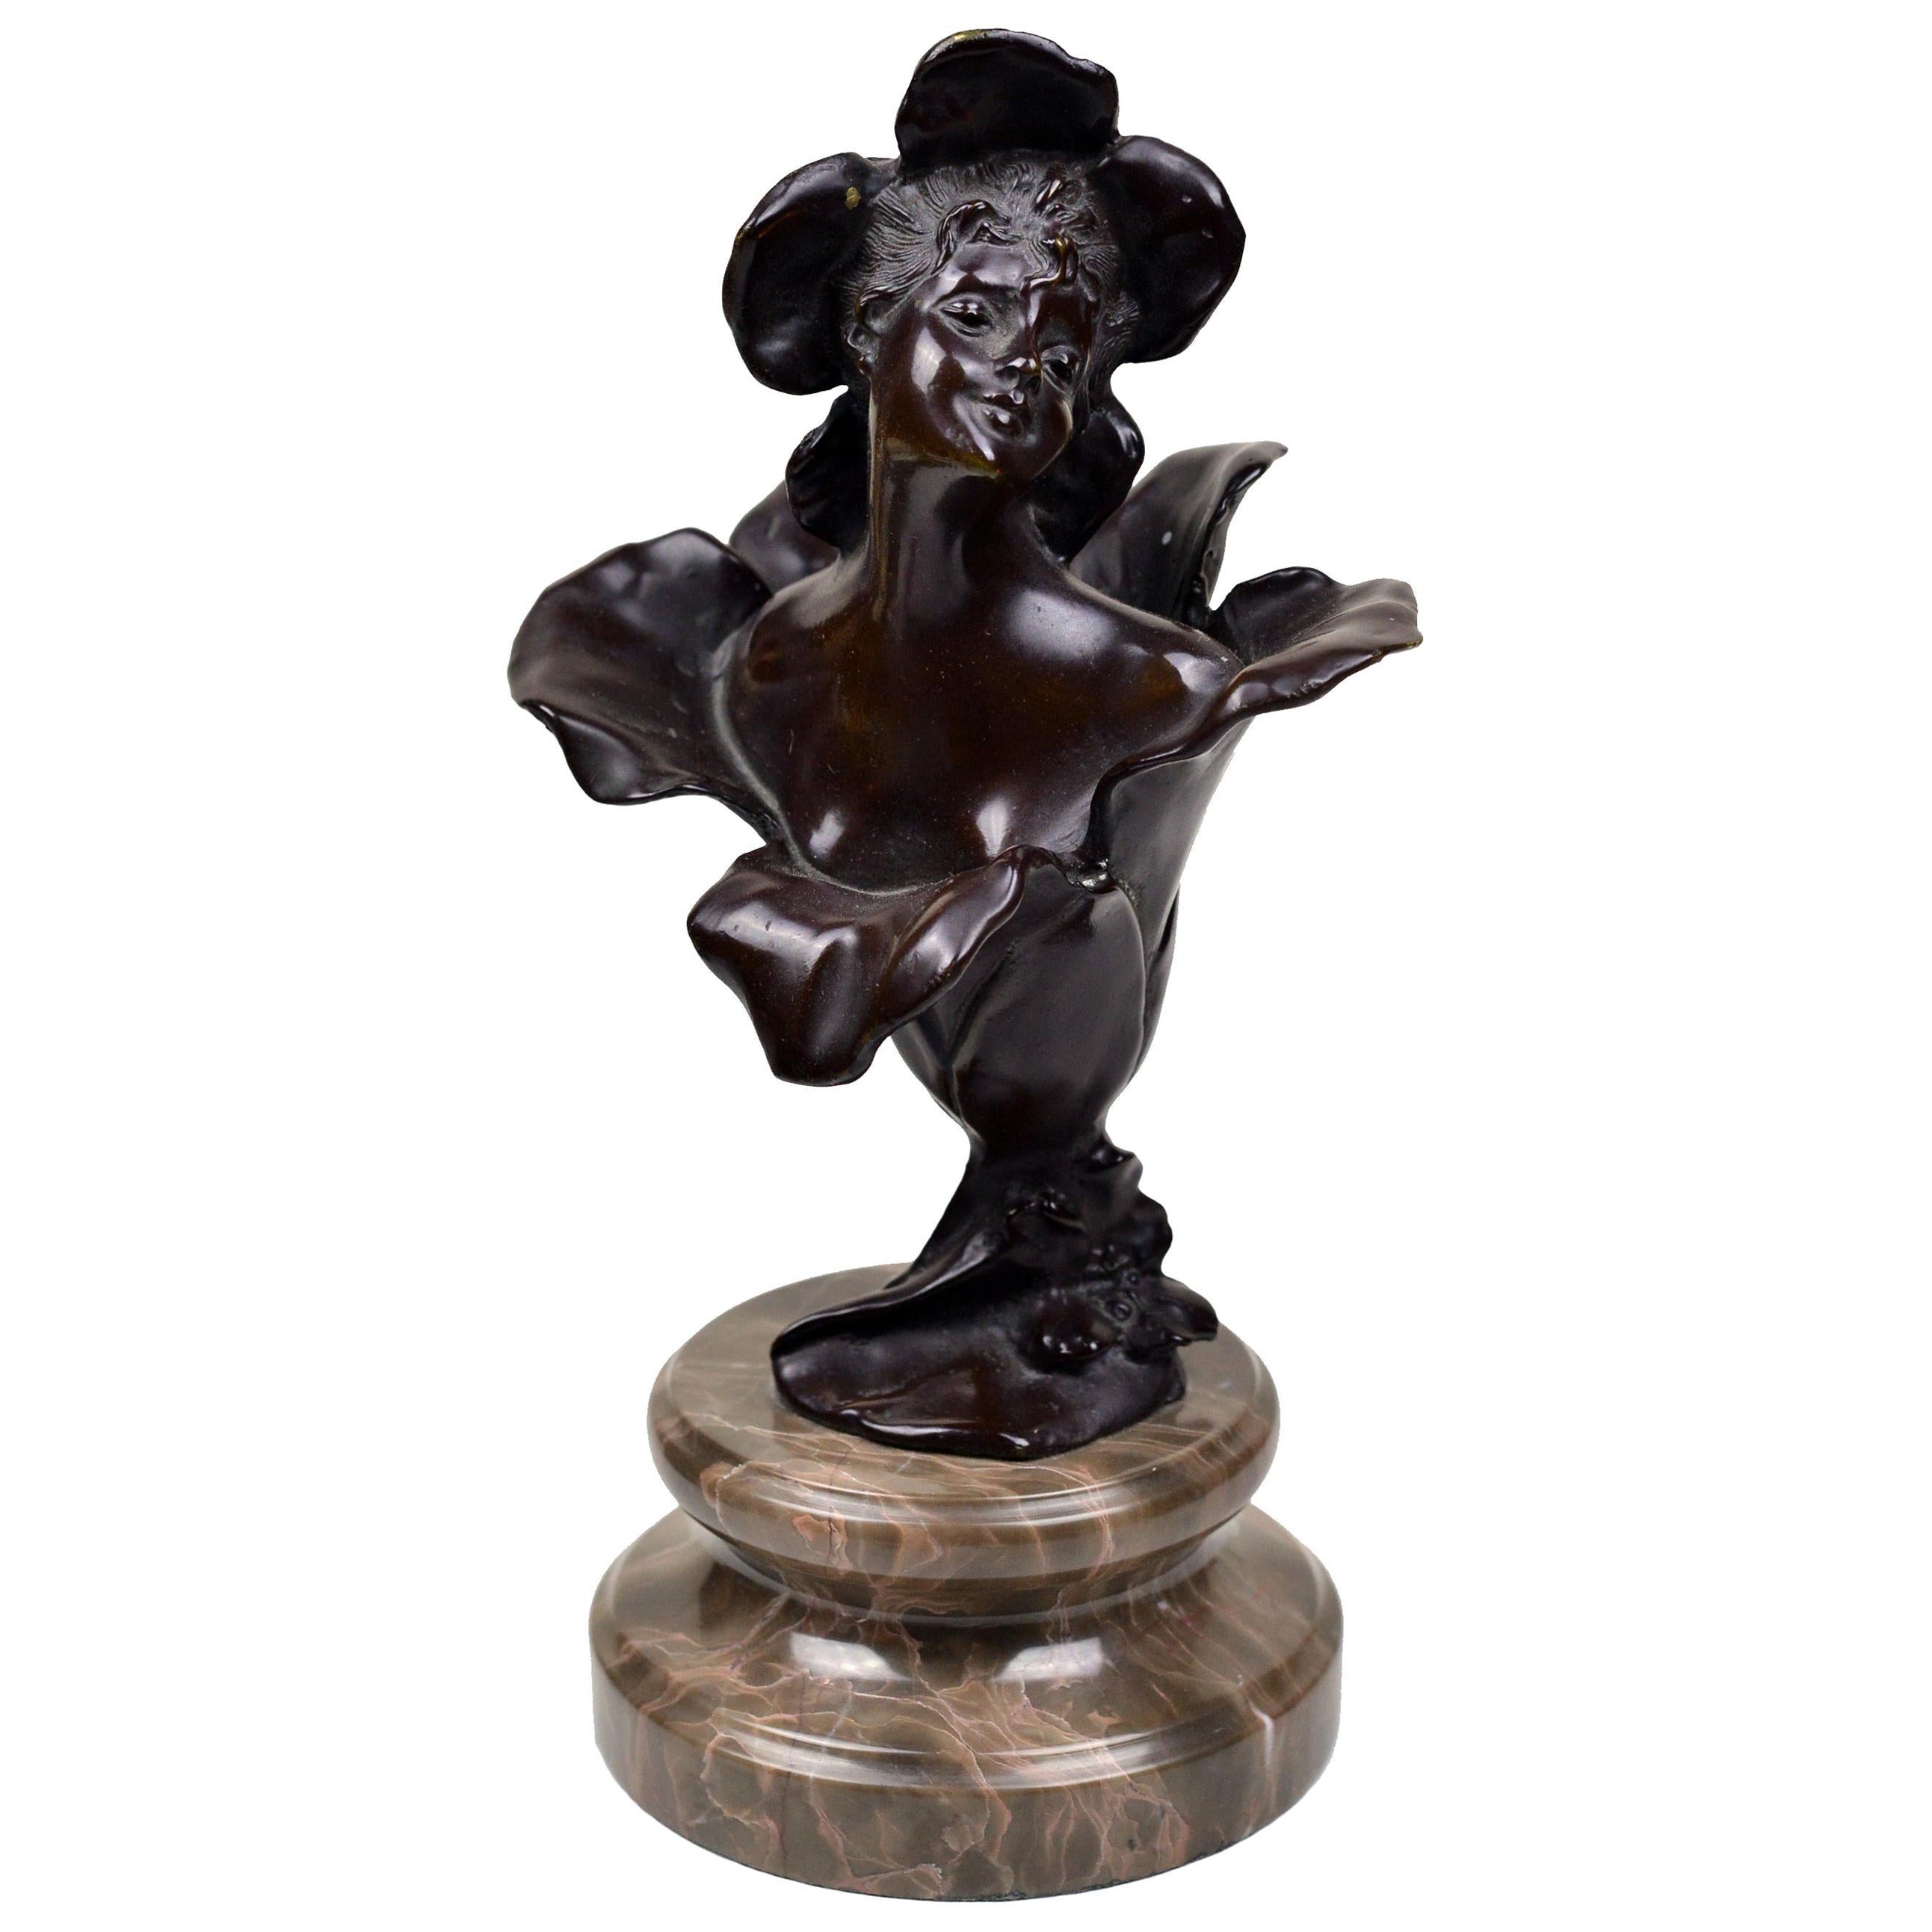 Figurine of Thumbelina Patinated Bronze n Stone Base 19th Century Art Nouveau For Sale